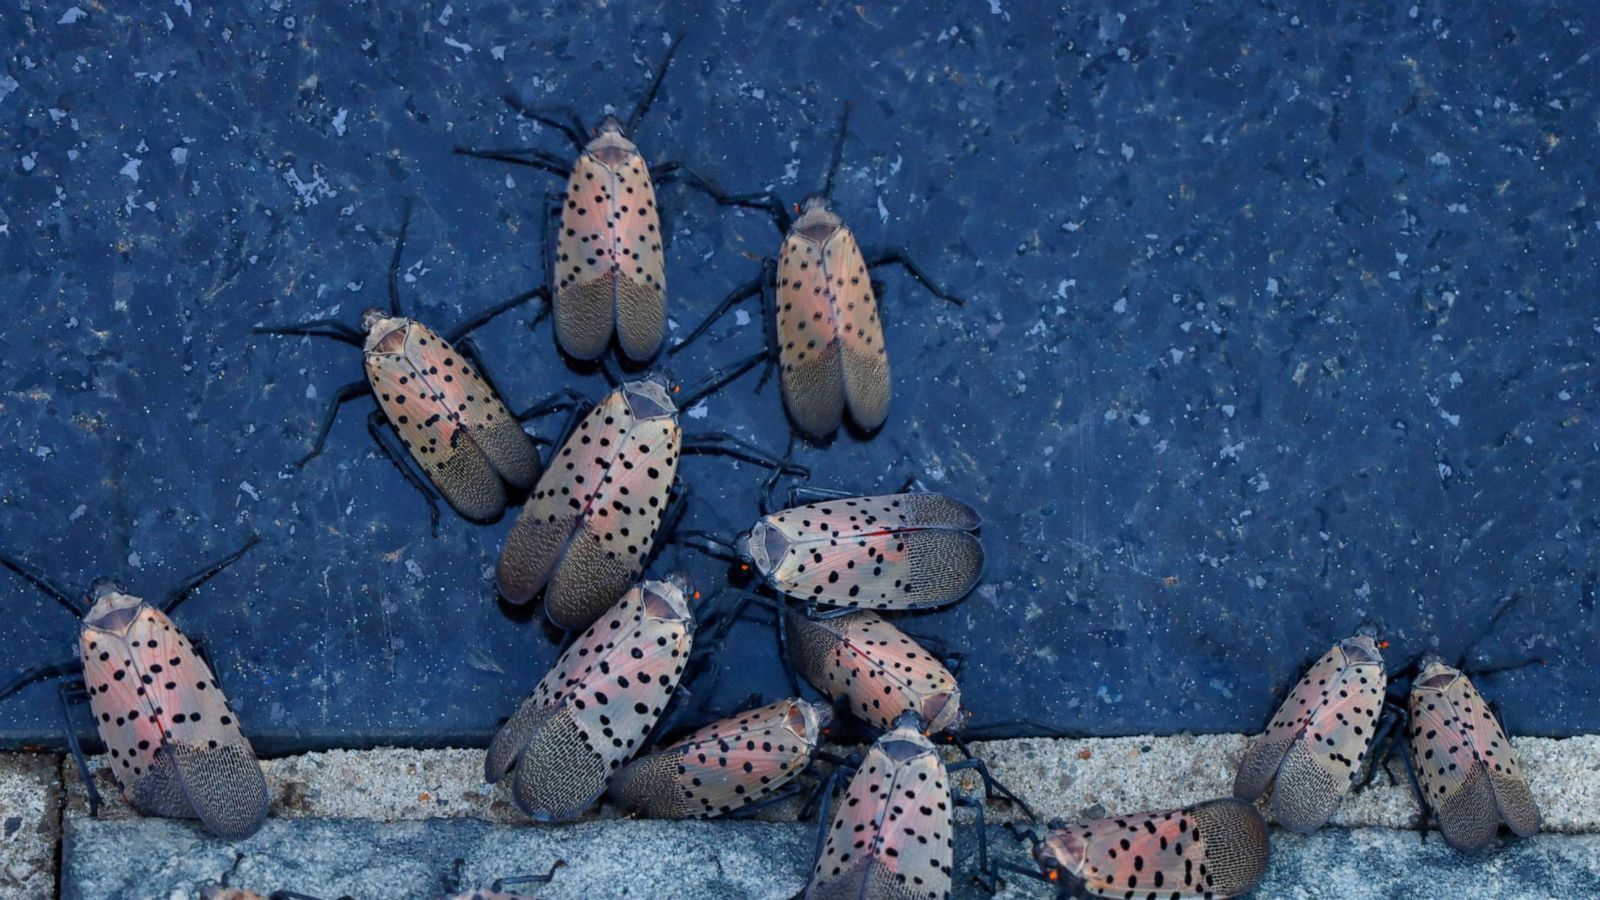 What to know about the spotted lanternfly, the insect experts say to squish  - ABC News